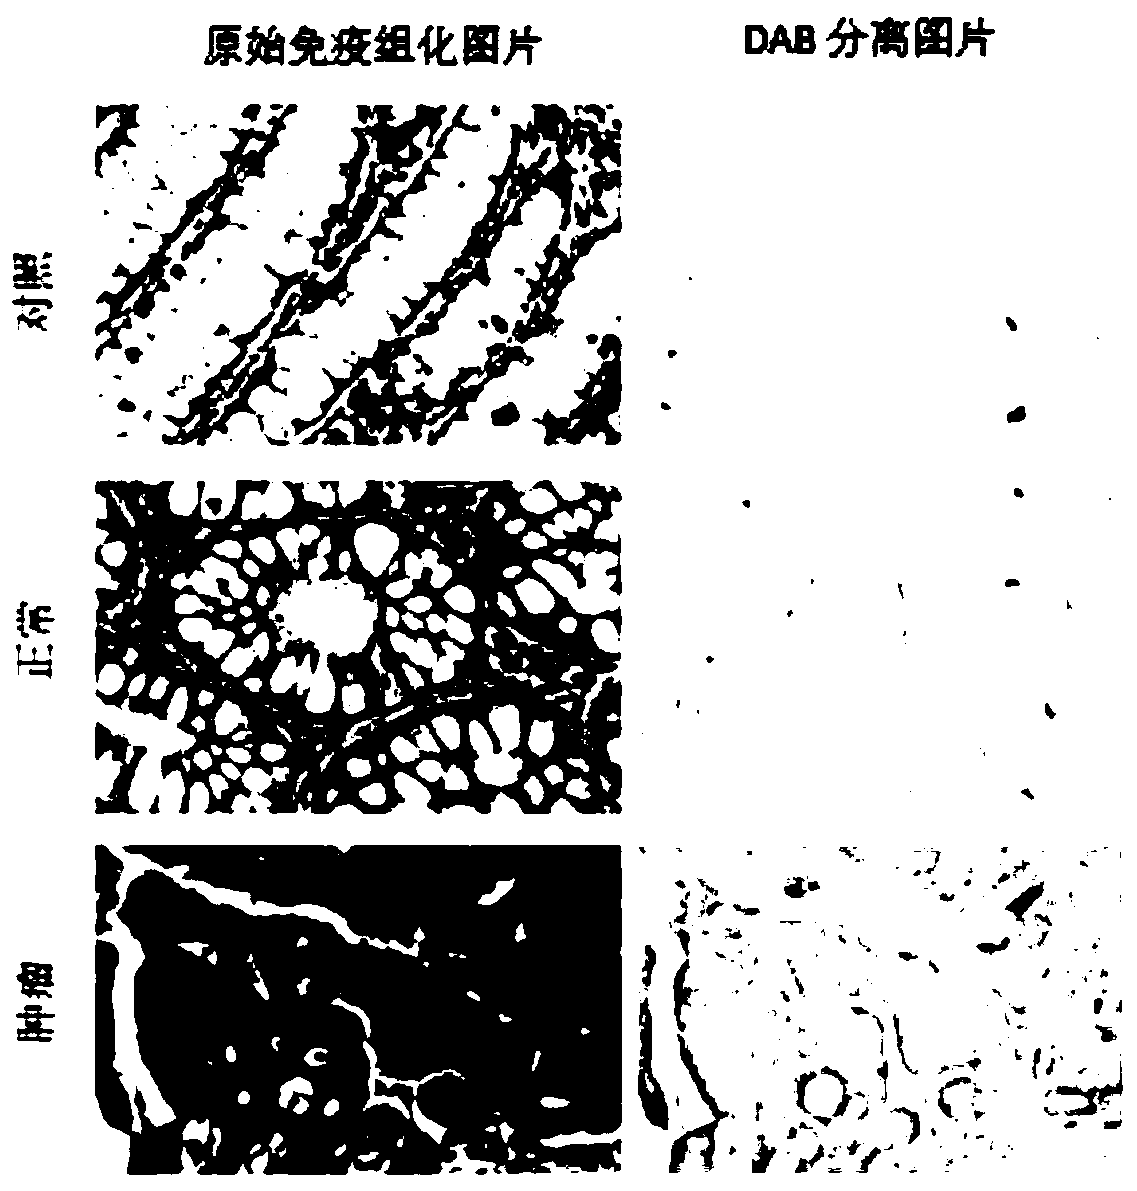 GLUT12 protein inhibitor and preparation method and application thereof